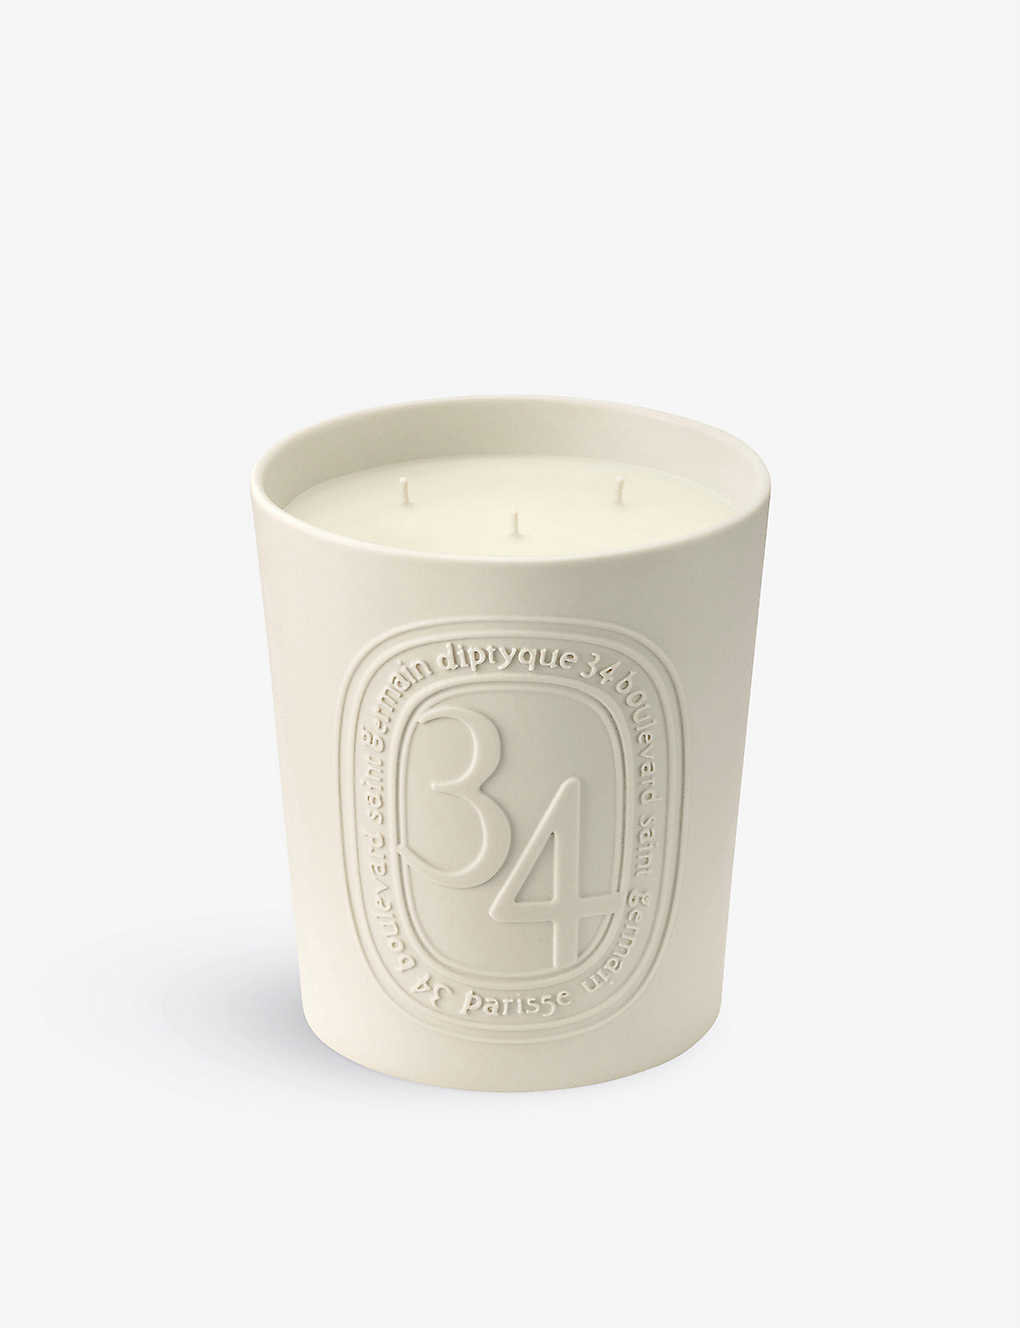 Diptyque 34 Boulevard Saint Germain Scented Candle 600g